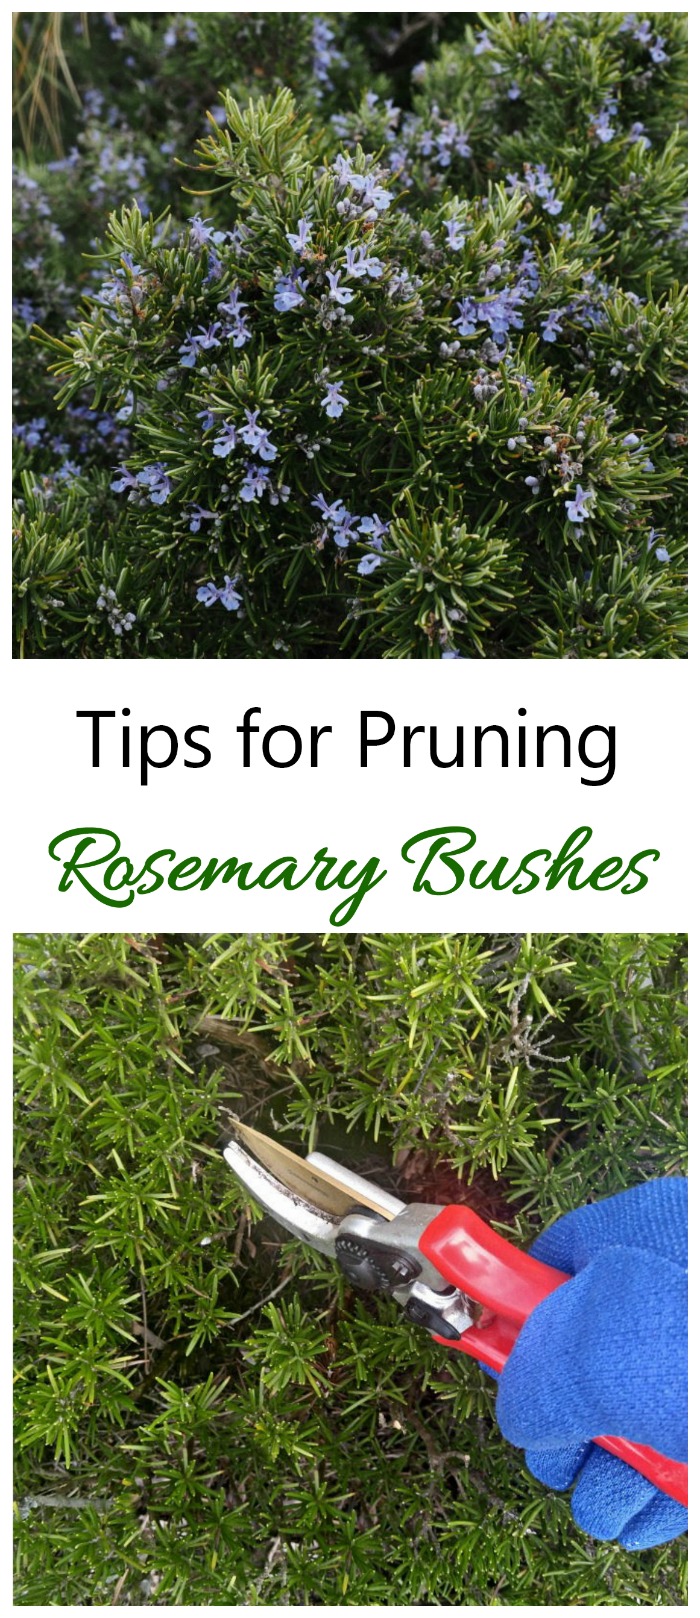 Pruning Rosemary How And When To Prune Rosemary Plants Bushes,Coin Stores Near Me Open